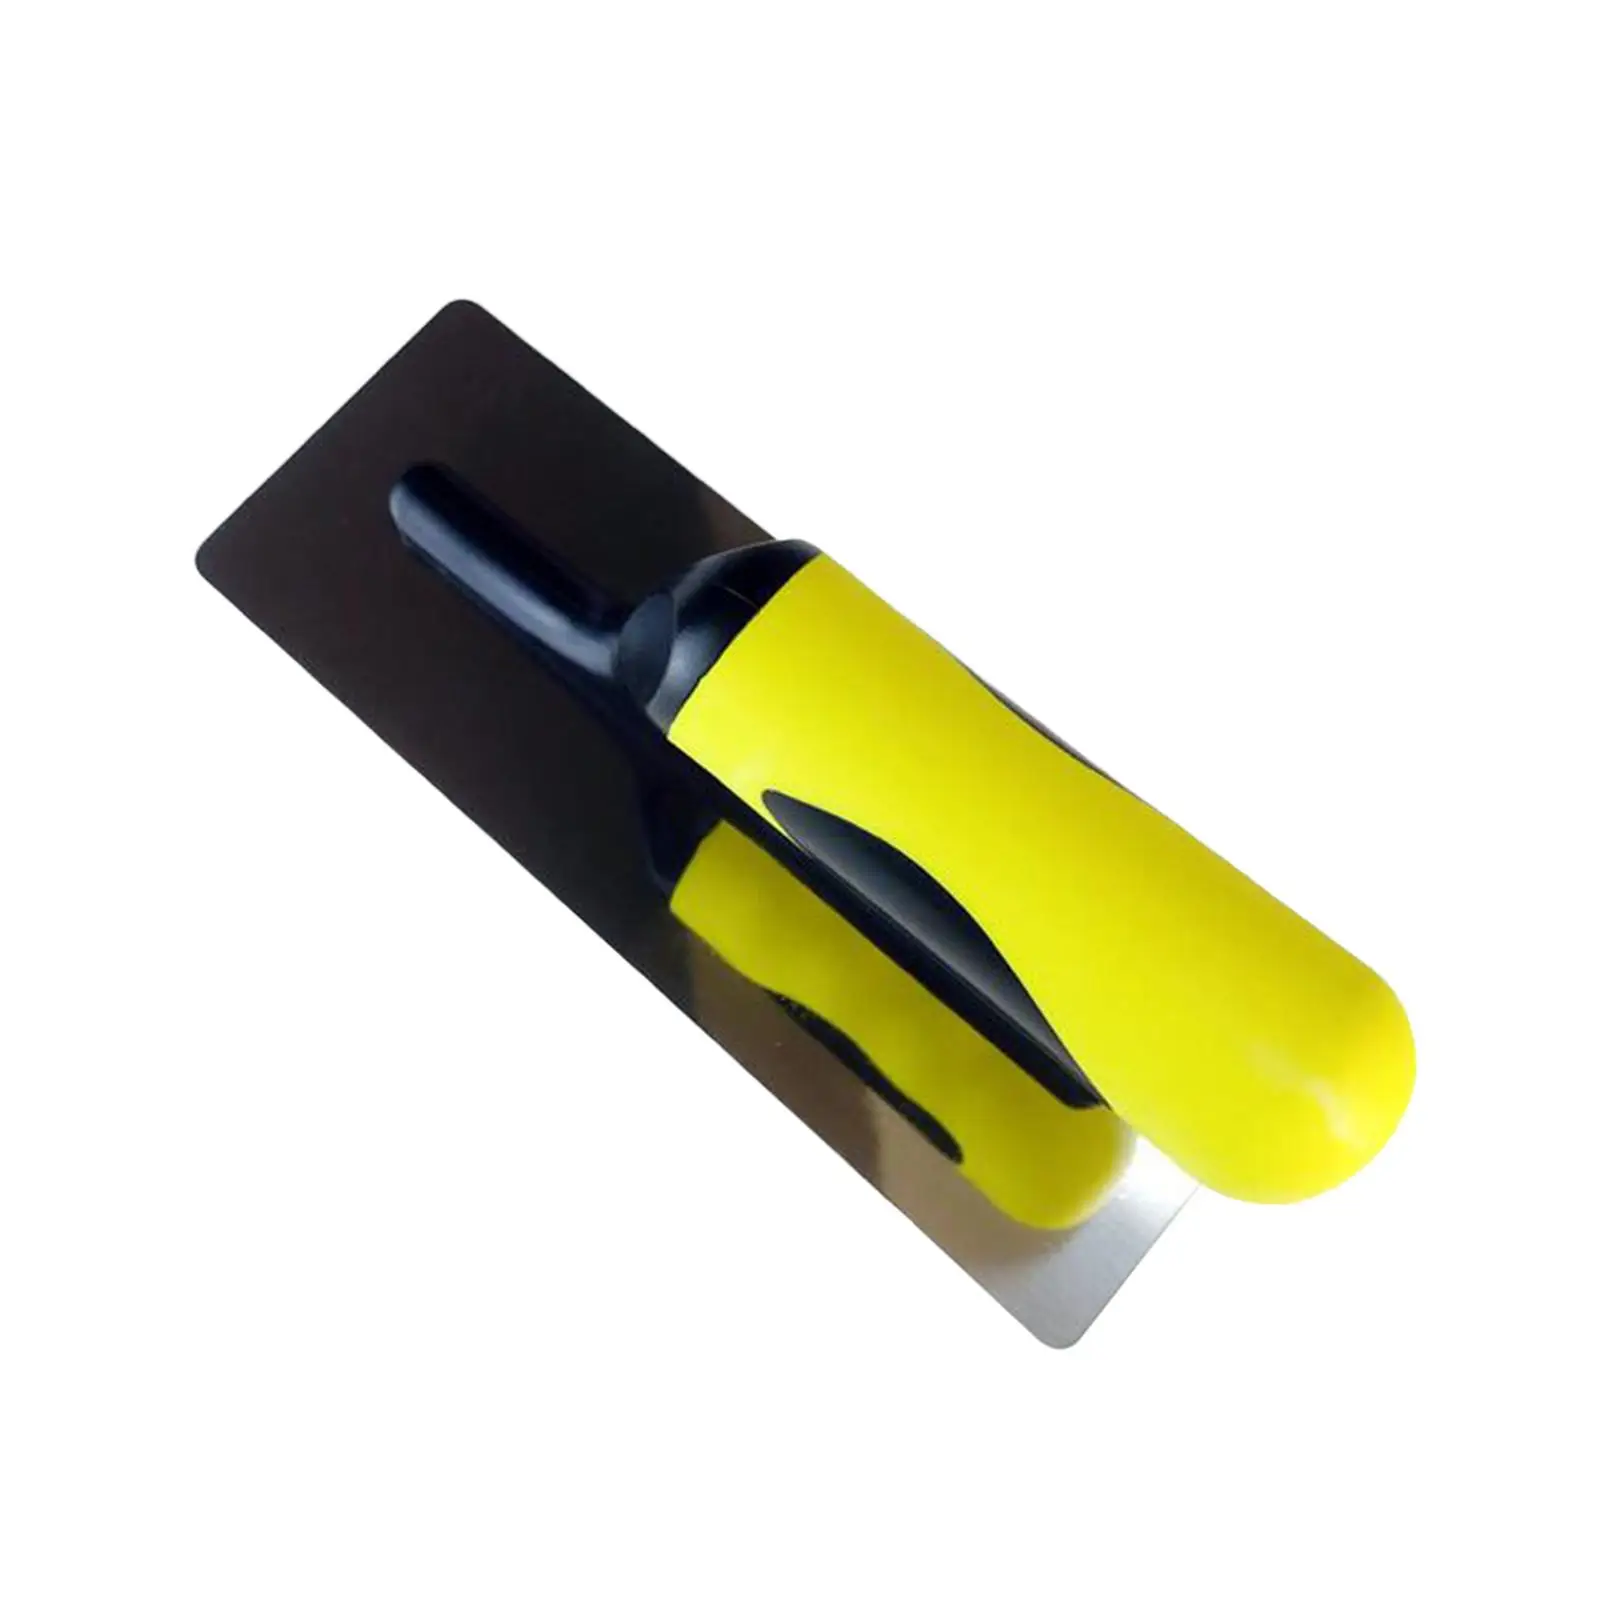 Finisher Plastering Trowel Spatula Knife Scraper for Drywall Scraping Cement